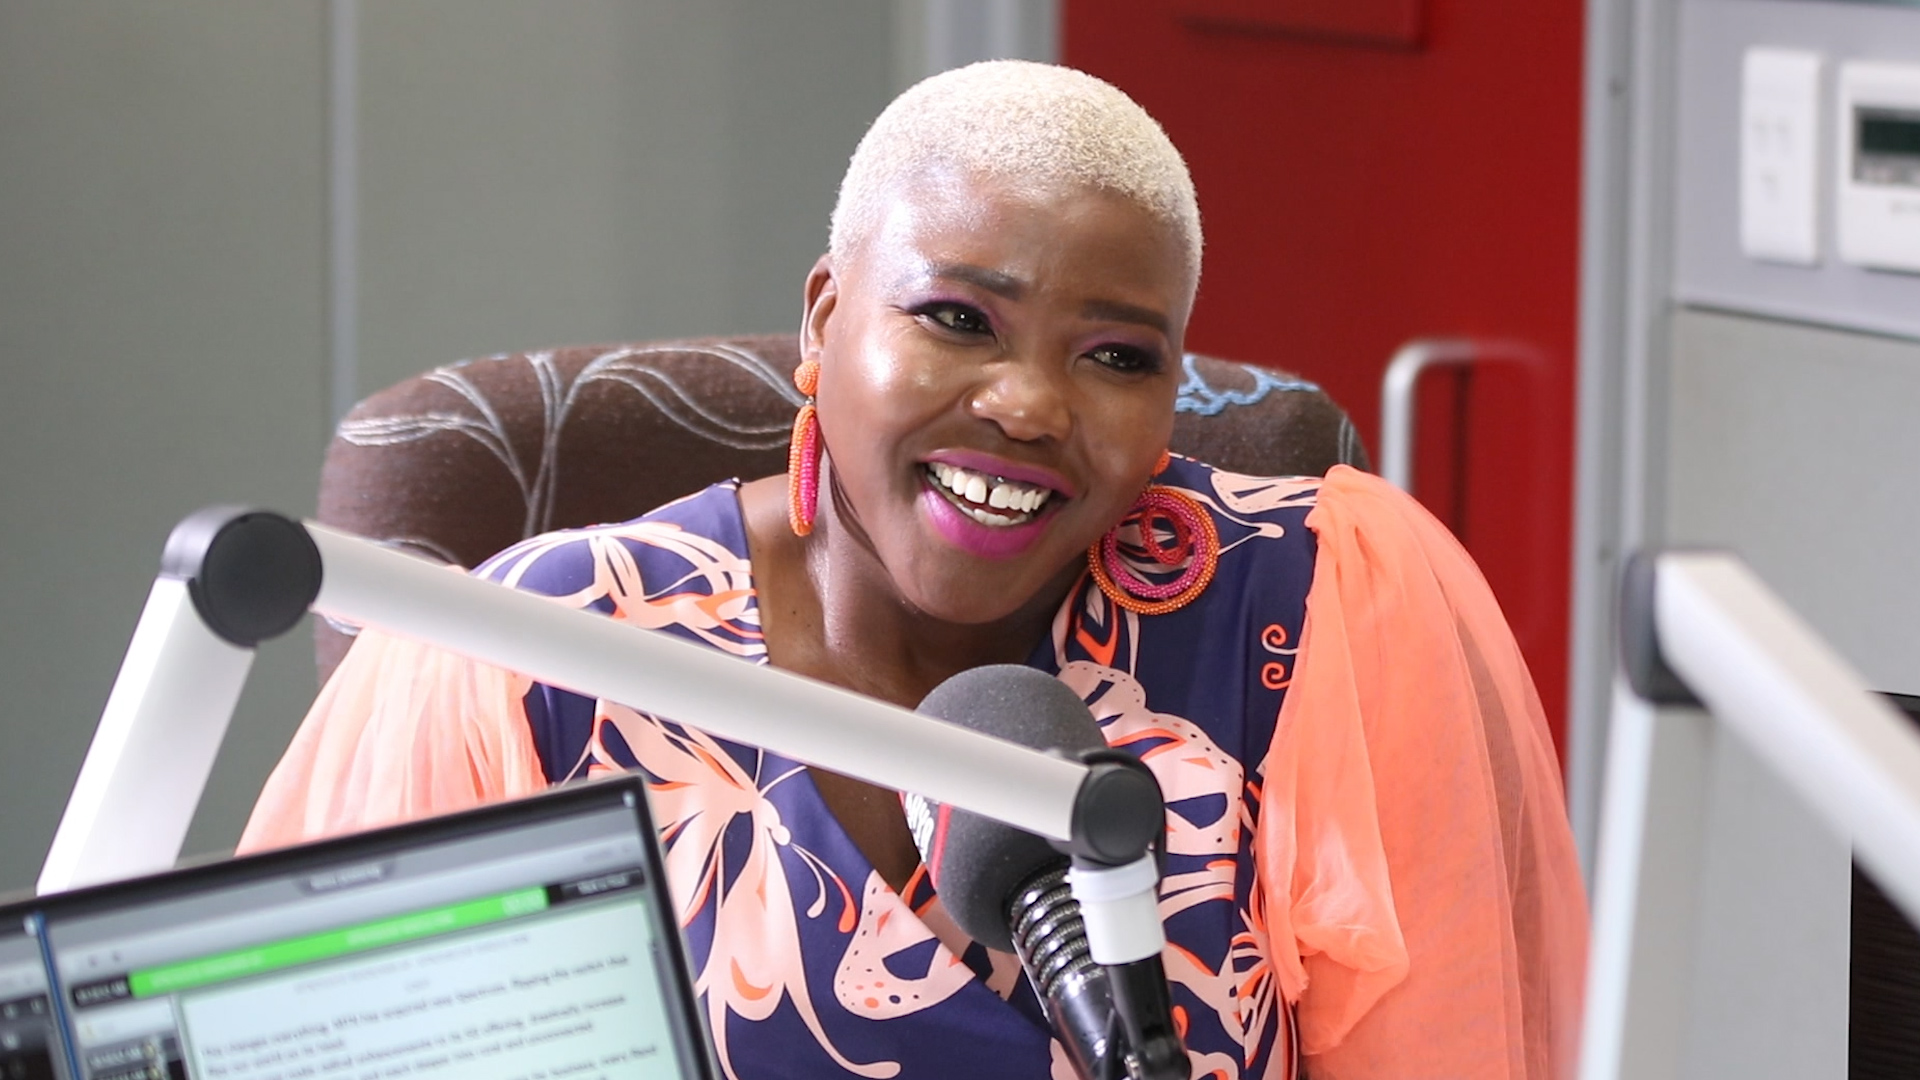 CELESTE NTULI on being enough as a black woman and her show “Men and Money” – My Top 10 with T Bose